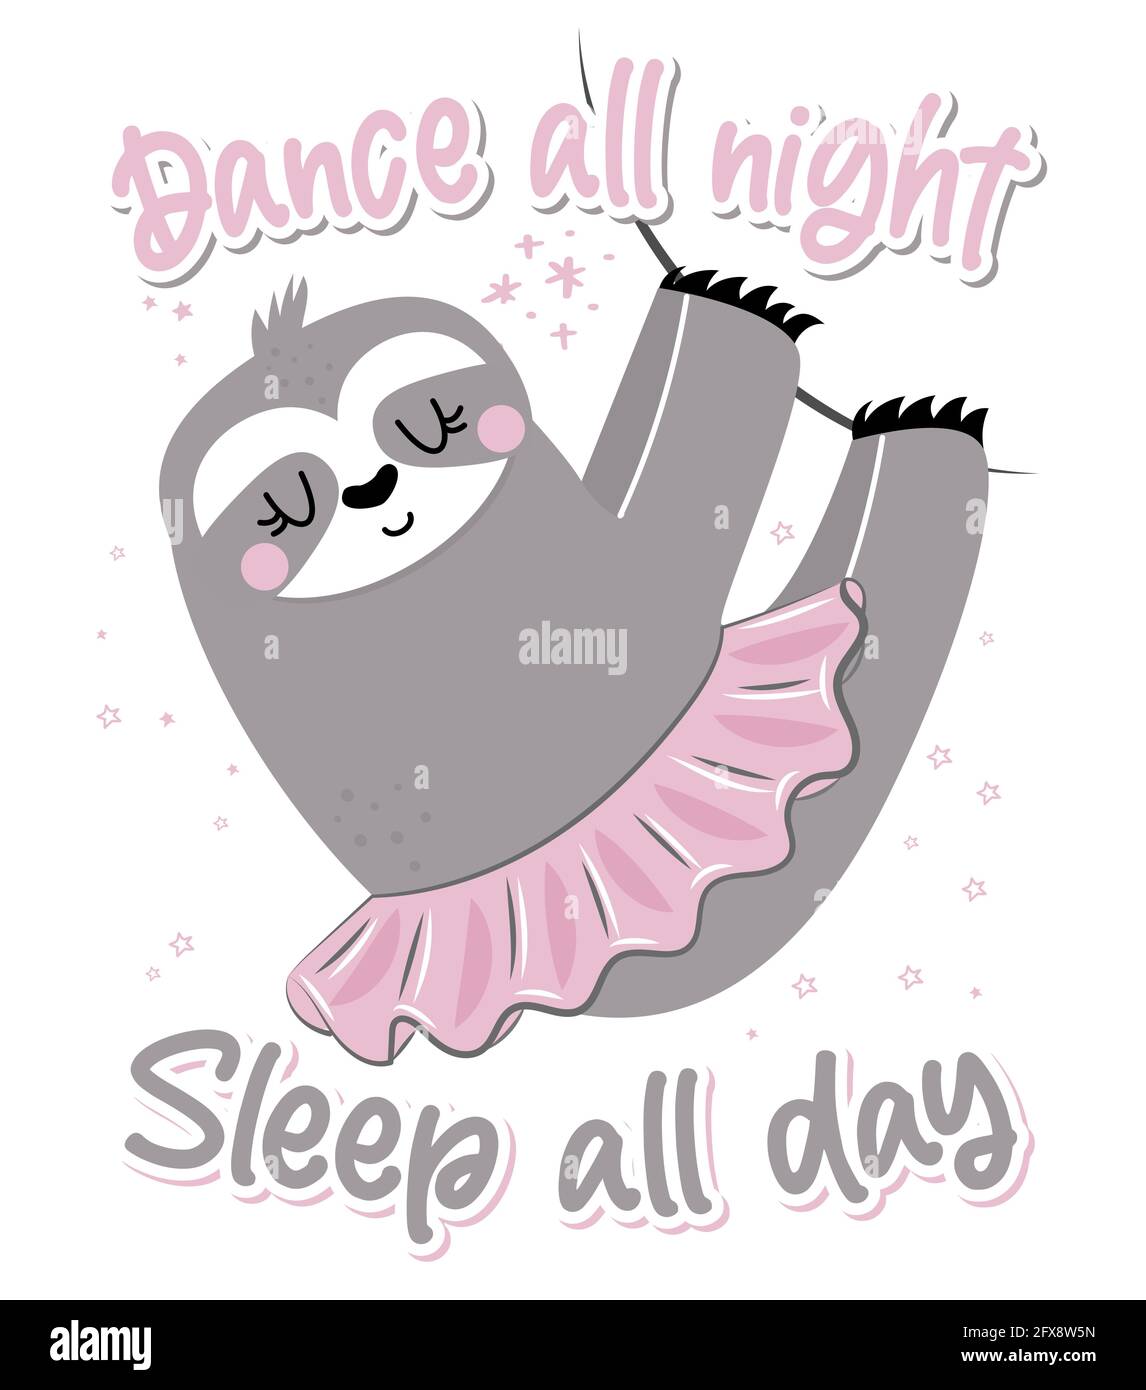 Dance all night sleep all day - cute sloth hanging on twig. Relax and enjoy the summer. Lazy lifestyles, feeling, summer vibes. Motivational quotes. H Stock Vector